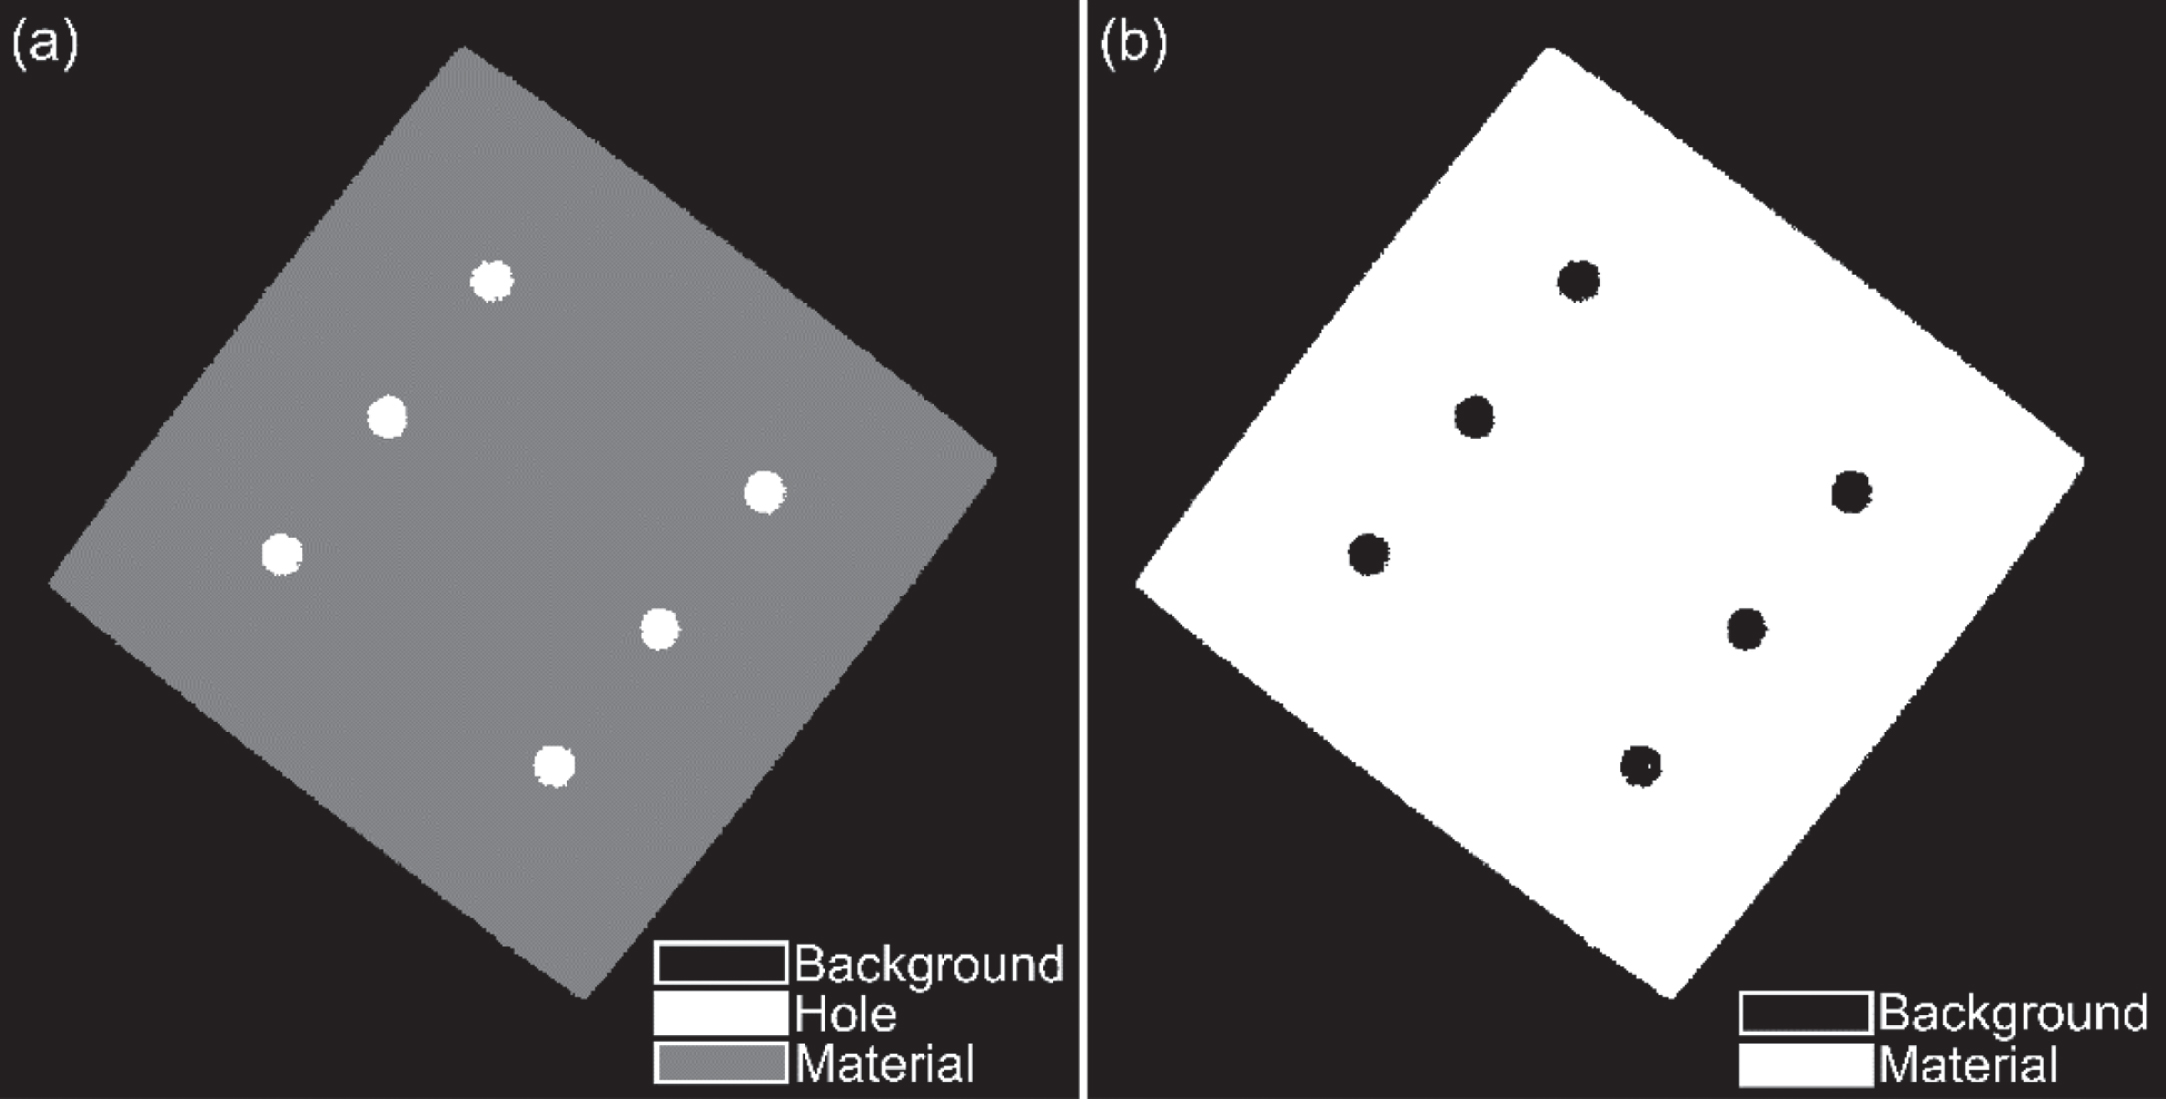 For the titanium cuboid CT image in Fig. 7(a): (a) MRF segmentation output with 3 labels and the constraint to prevent forming of an imaginary layer of hole pixels on object boundary, and (b) final segmentation of the titanium cuboid.